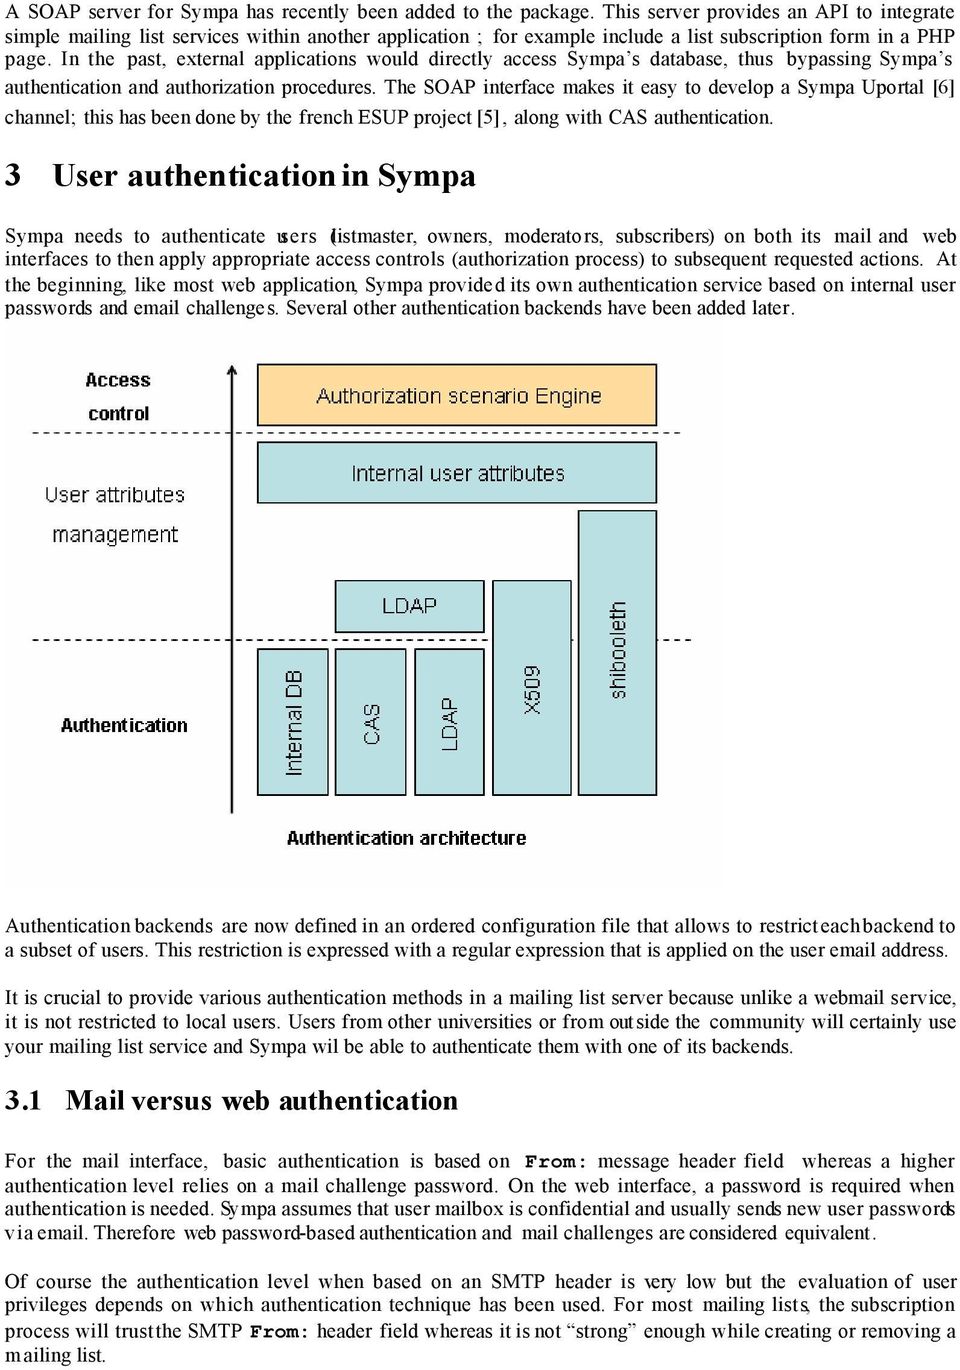 In the past, external applications would directly access Sympa s database, thus bypassing Sympa s authentication and authorization procedures.